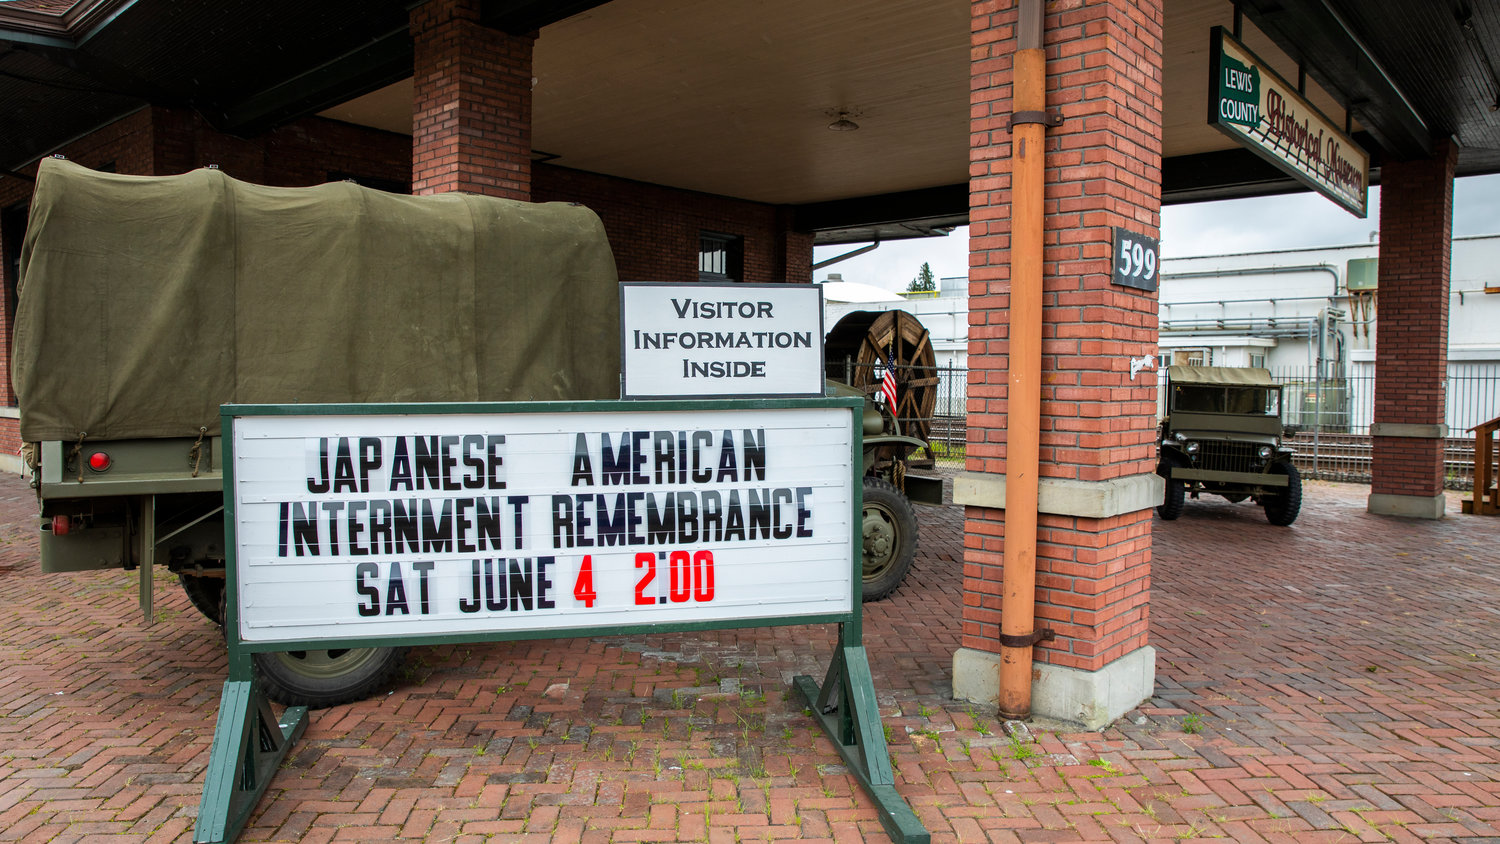 Signs are displayed next to vintage military vehicles at the Lewis County Historical Museum in Chehalis during a Japanese American internment remembrance.